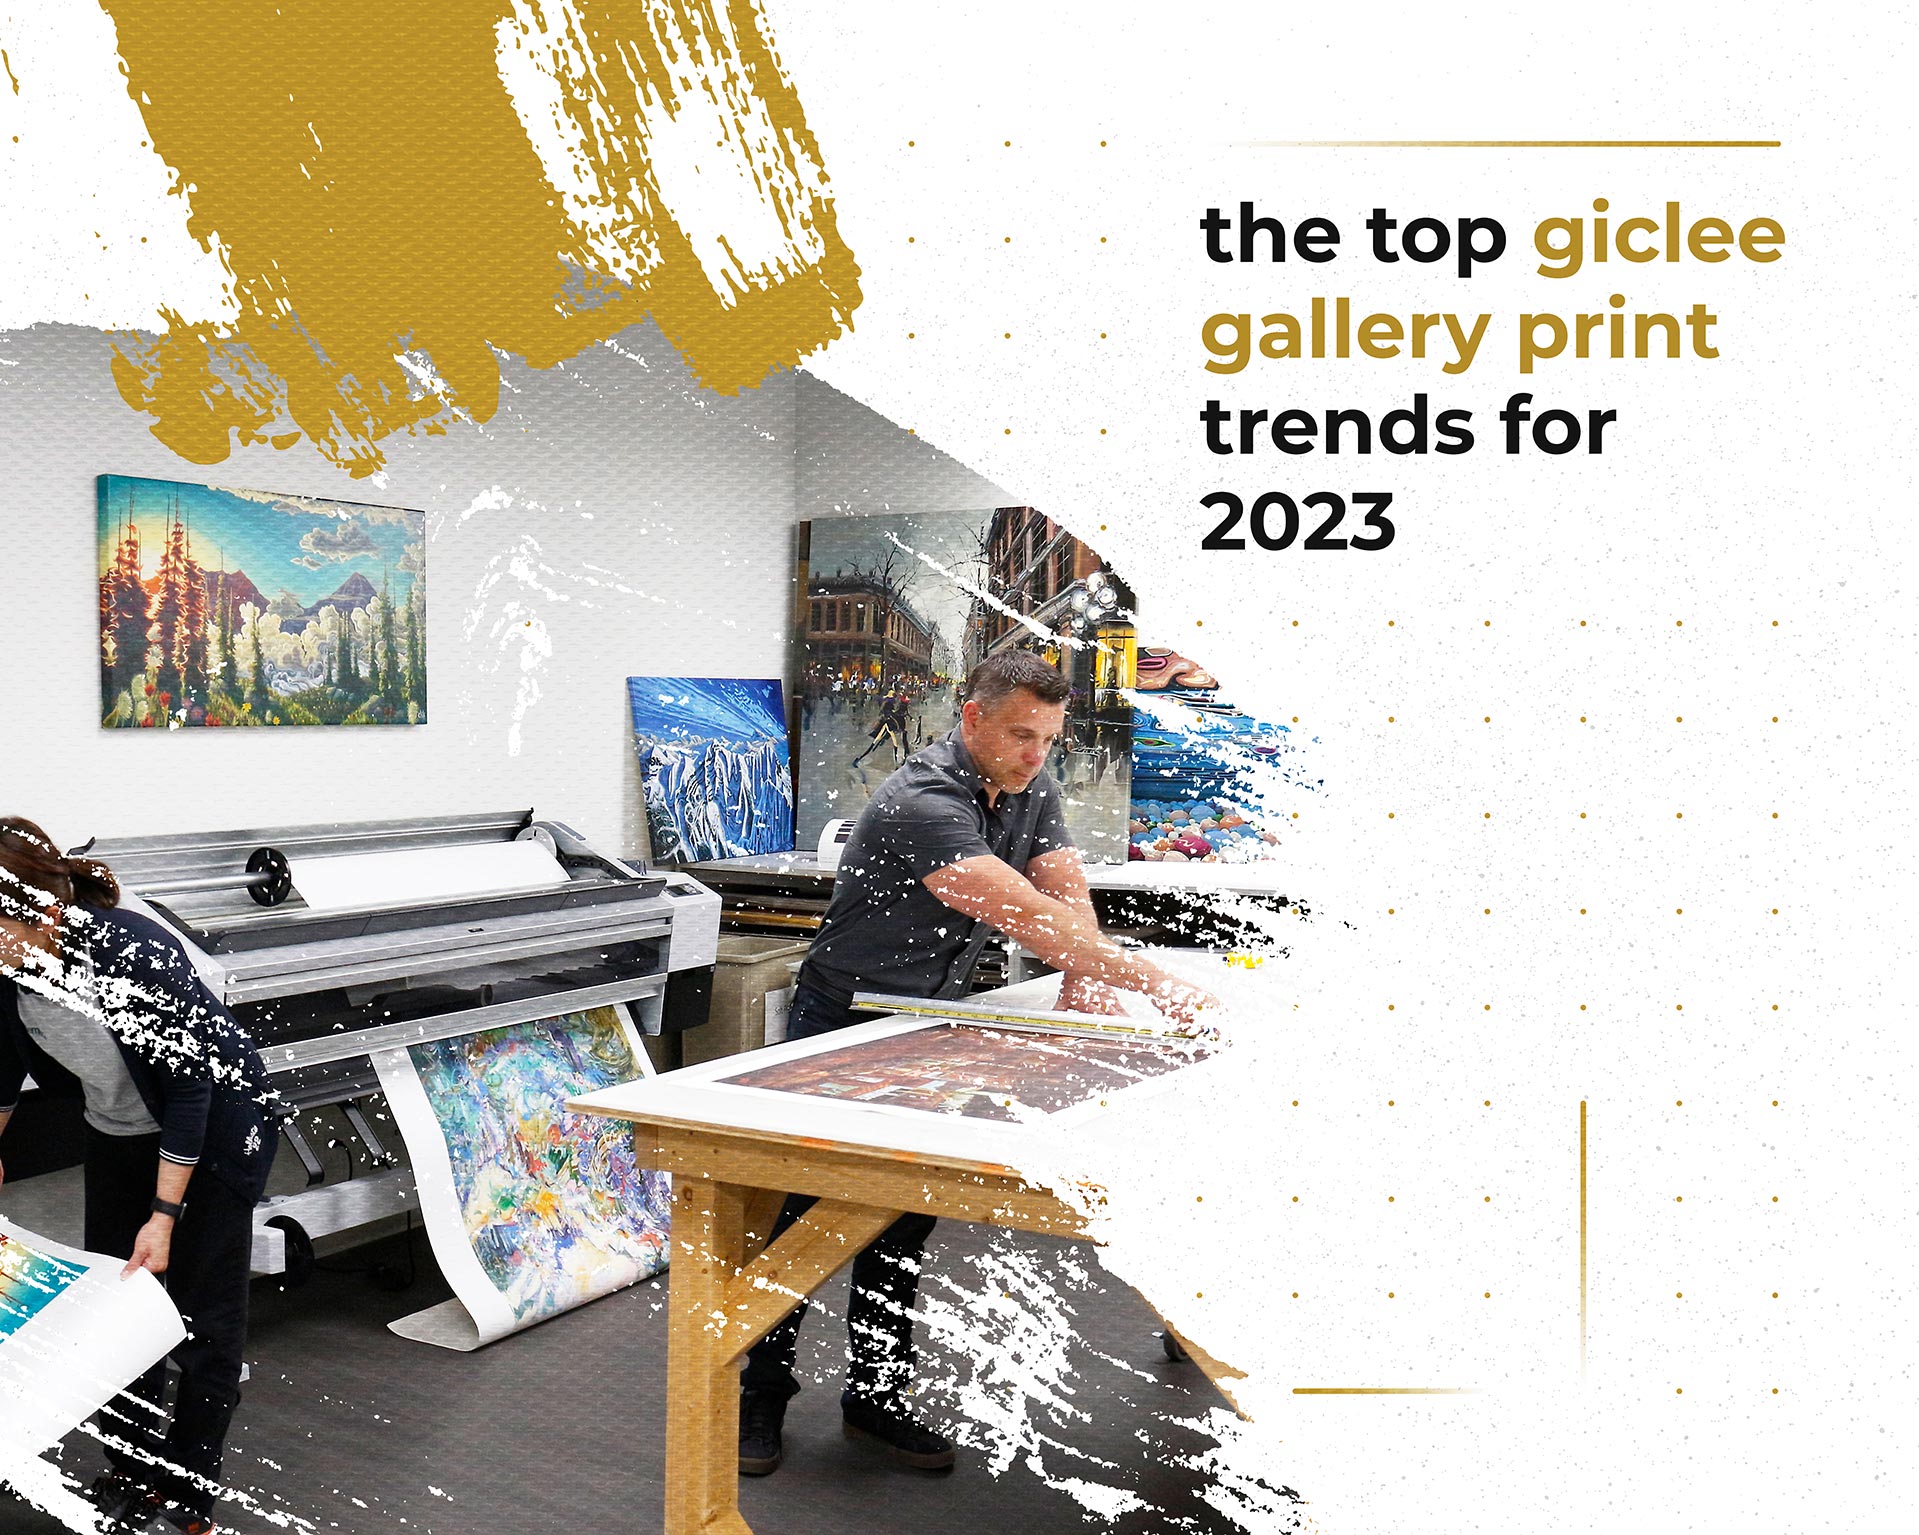 The Top Giclee Gallery Print Trends for 2023
